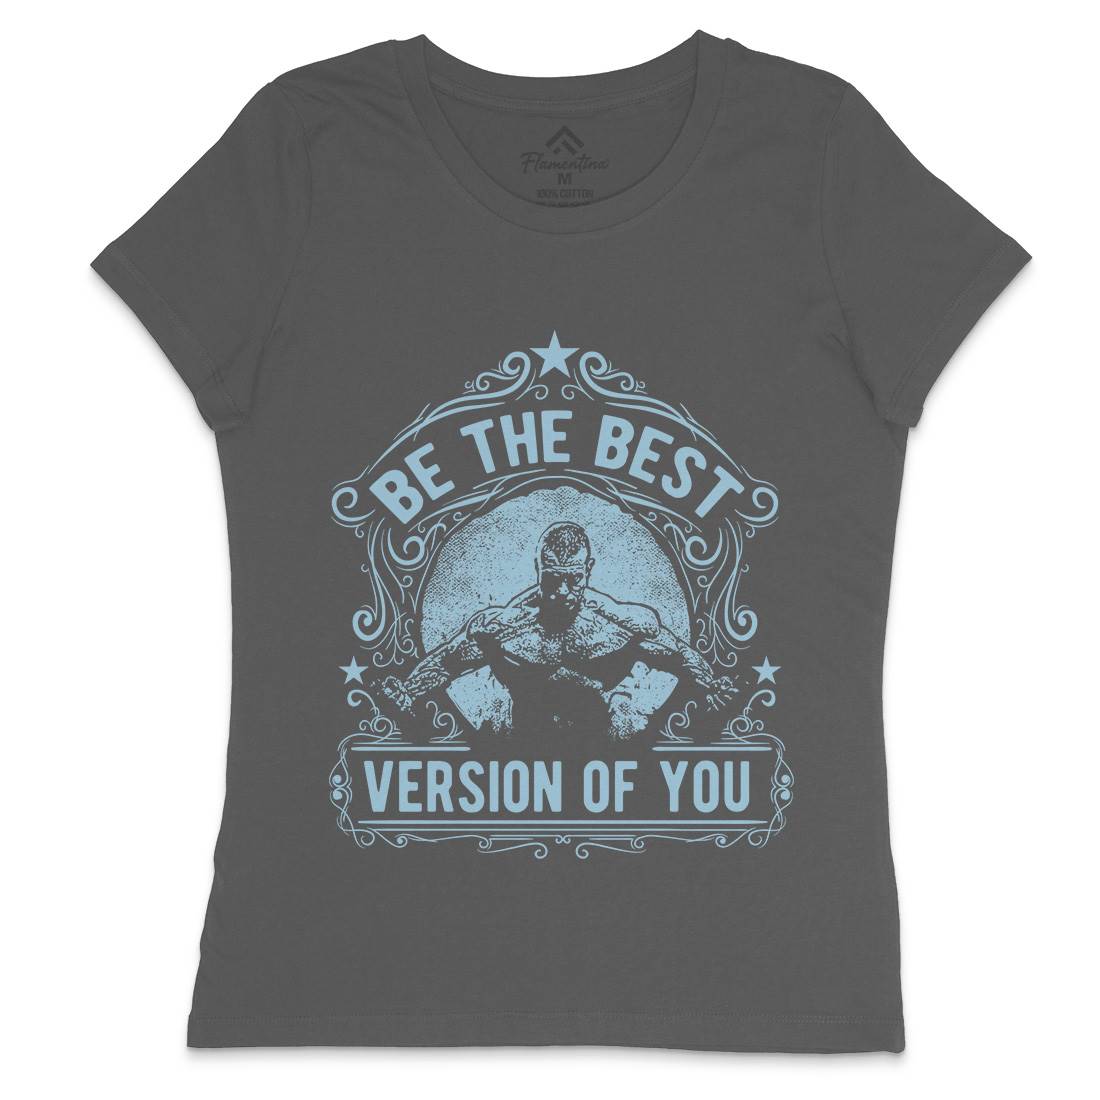 The Best Version Of You Womens Crew Neck T-Shirt Gym C985